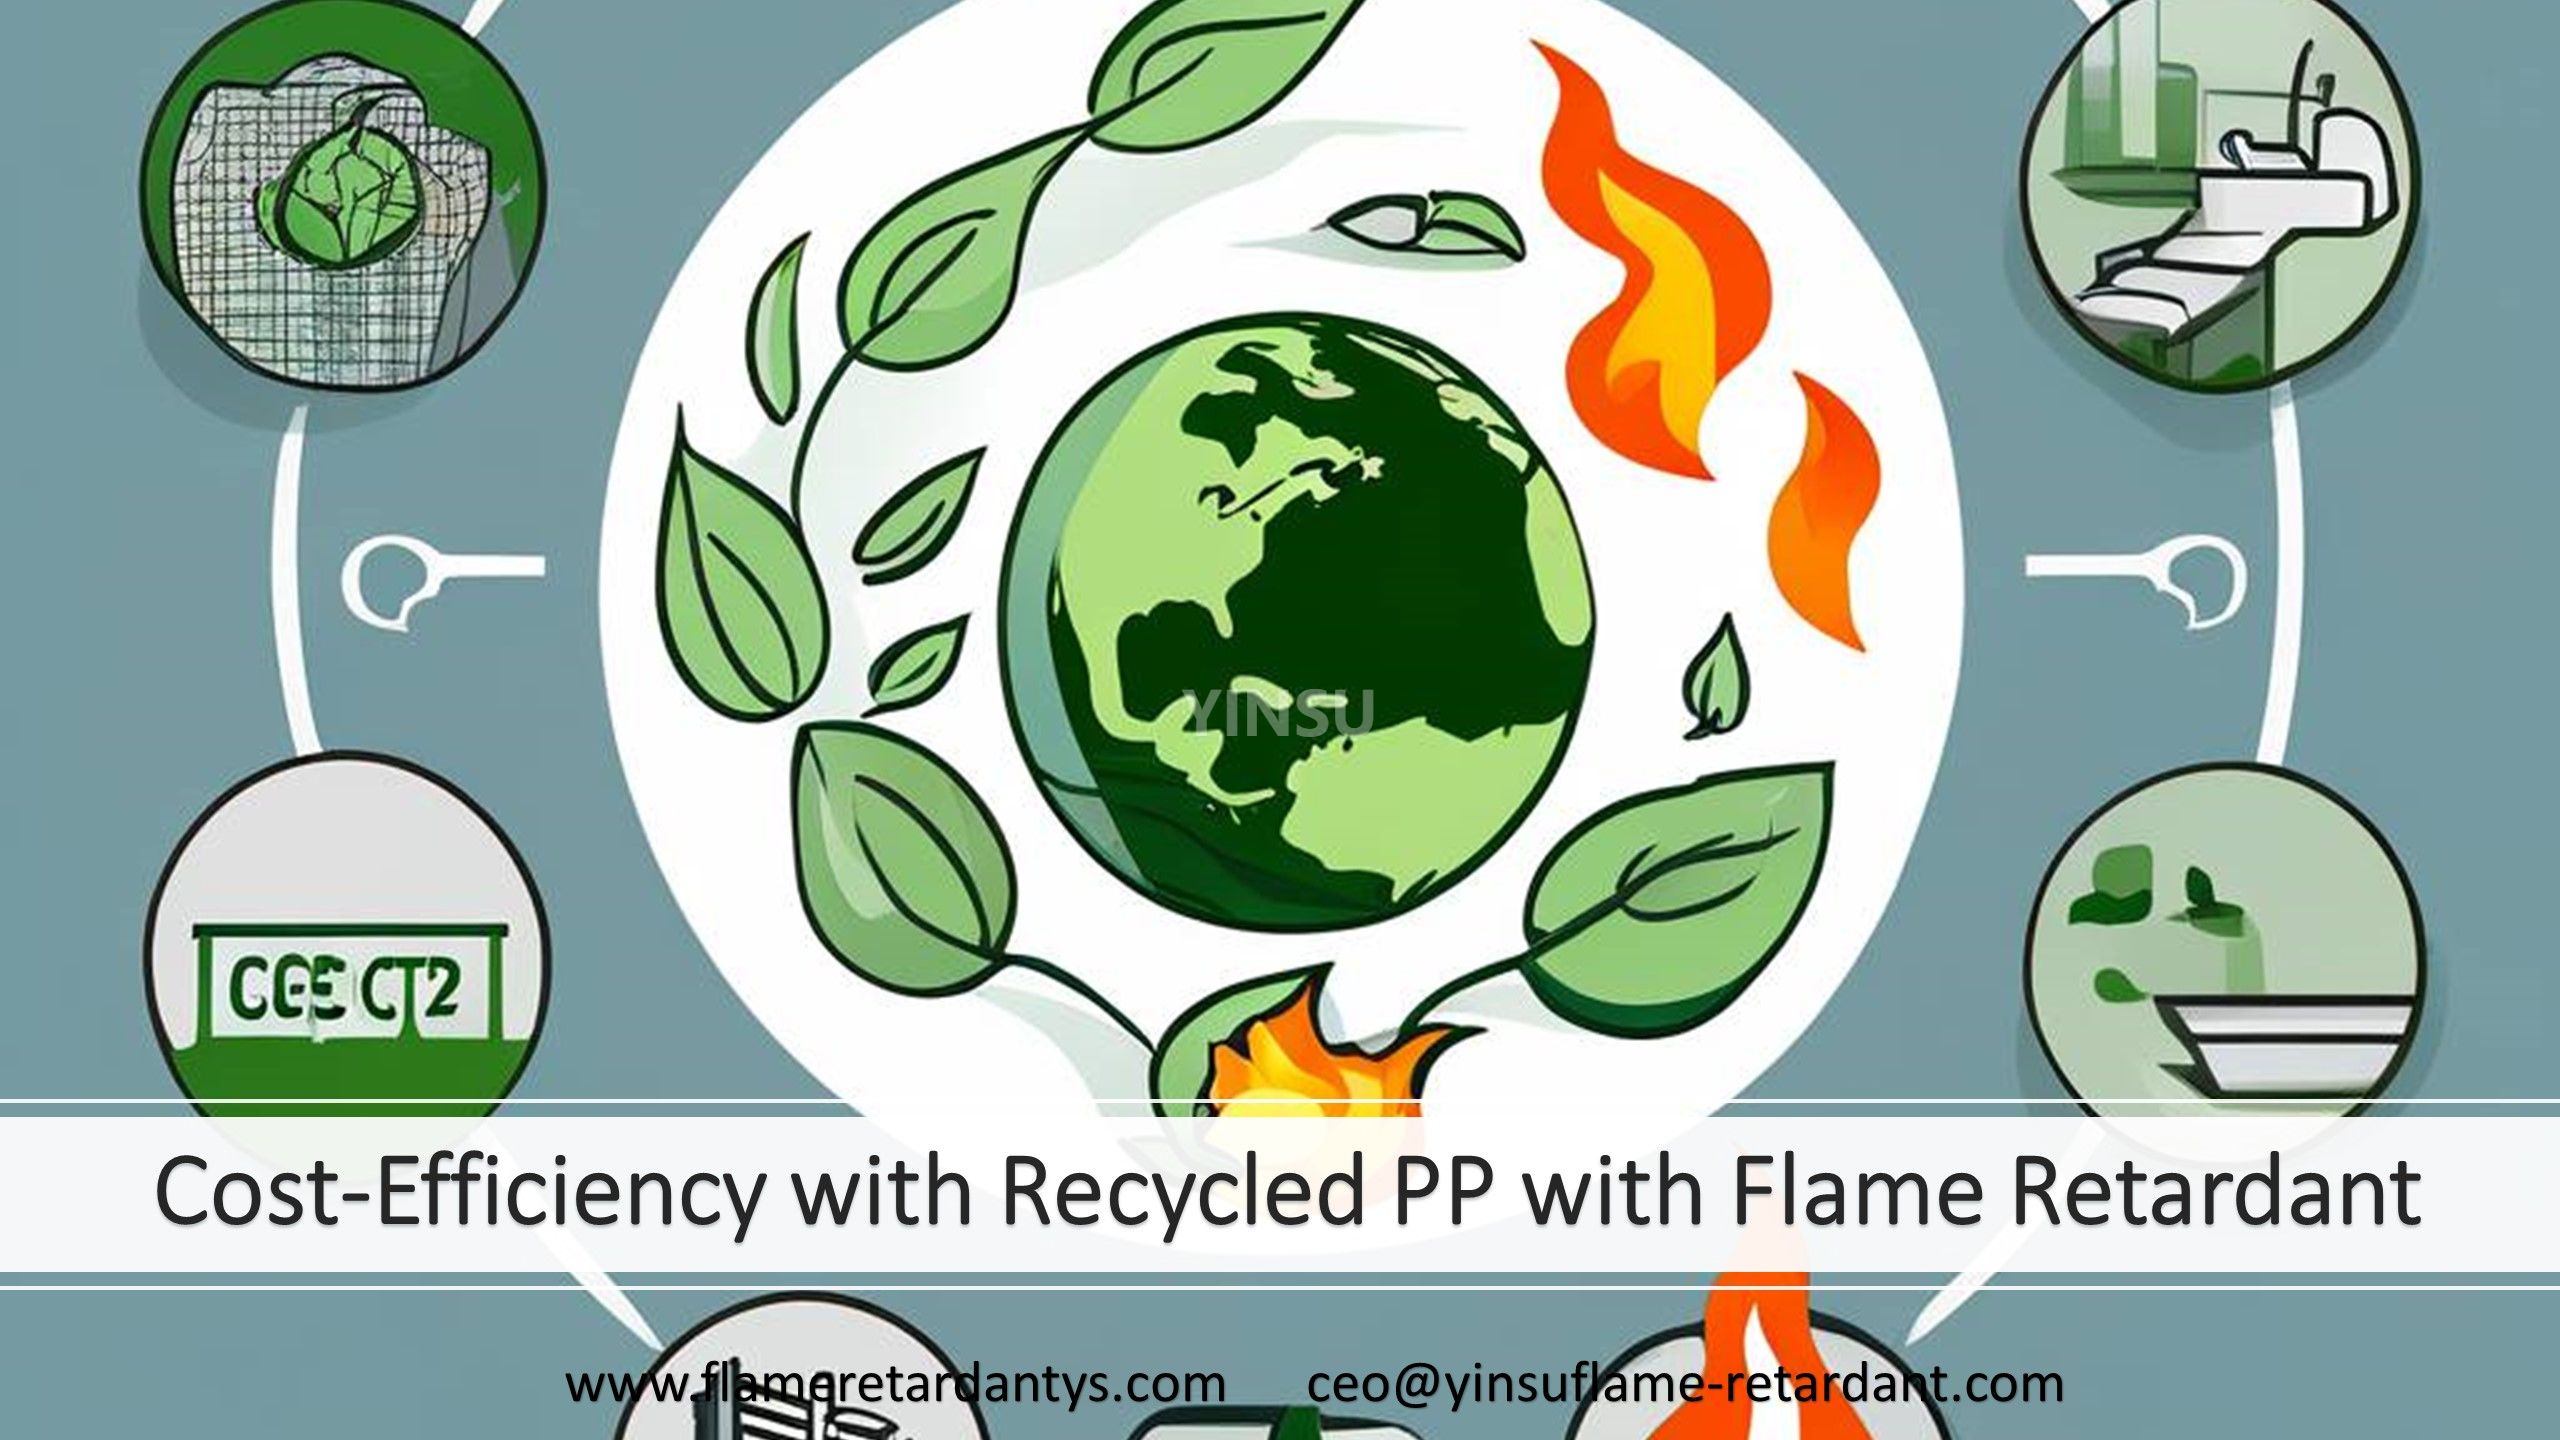 Cost-Efficiency with Recycled PP with Flame Retardant